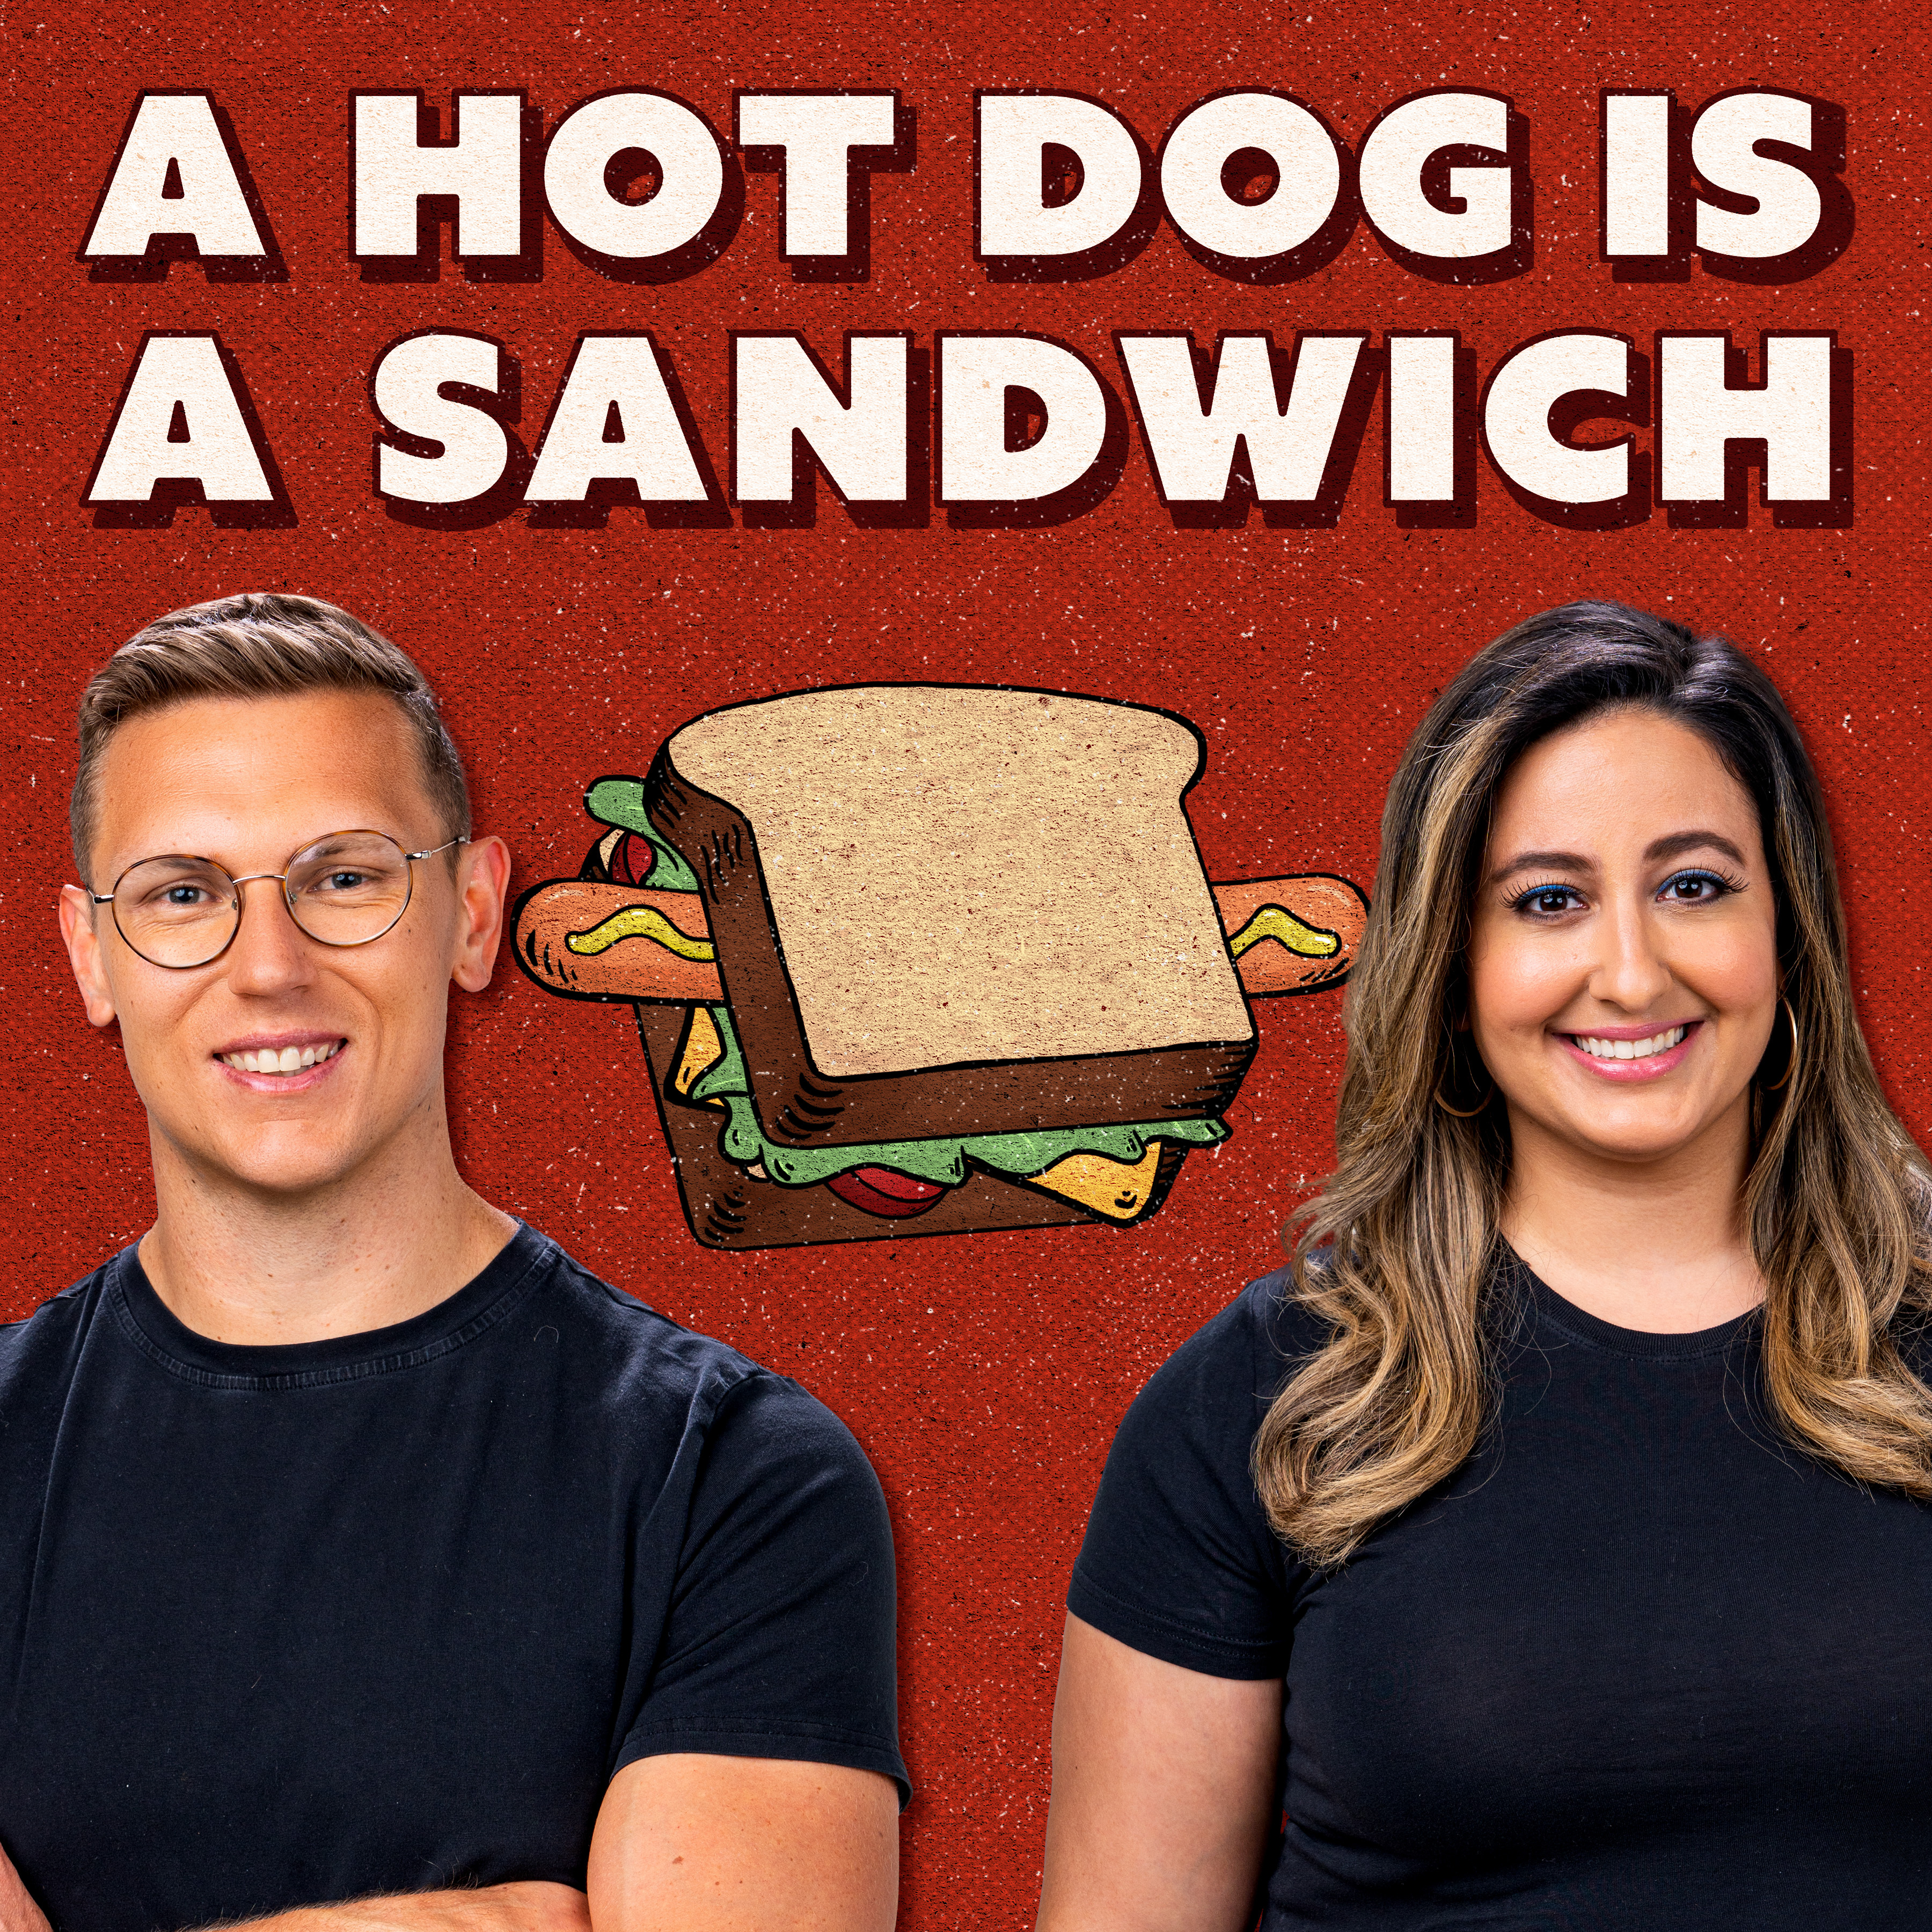 So is a hot dog a sandwich? The results so far